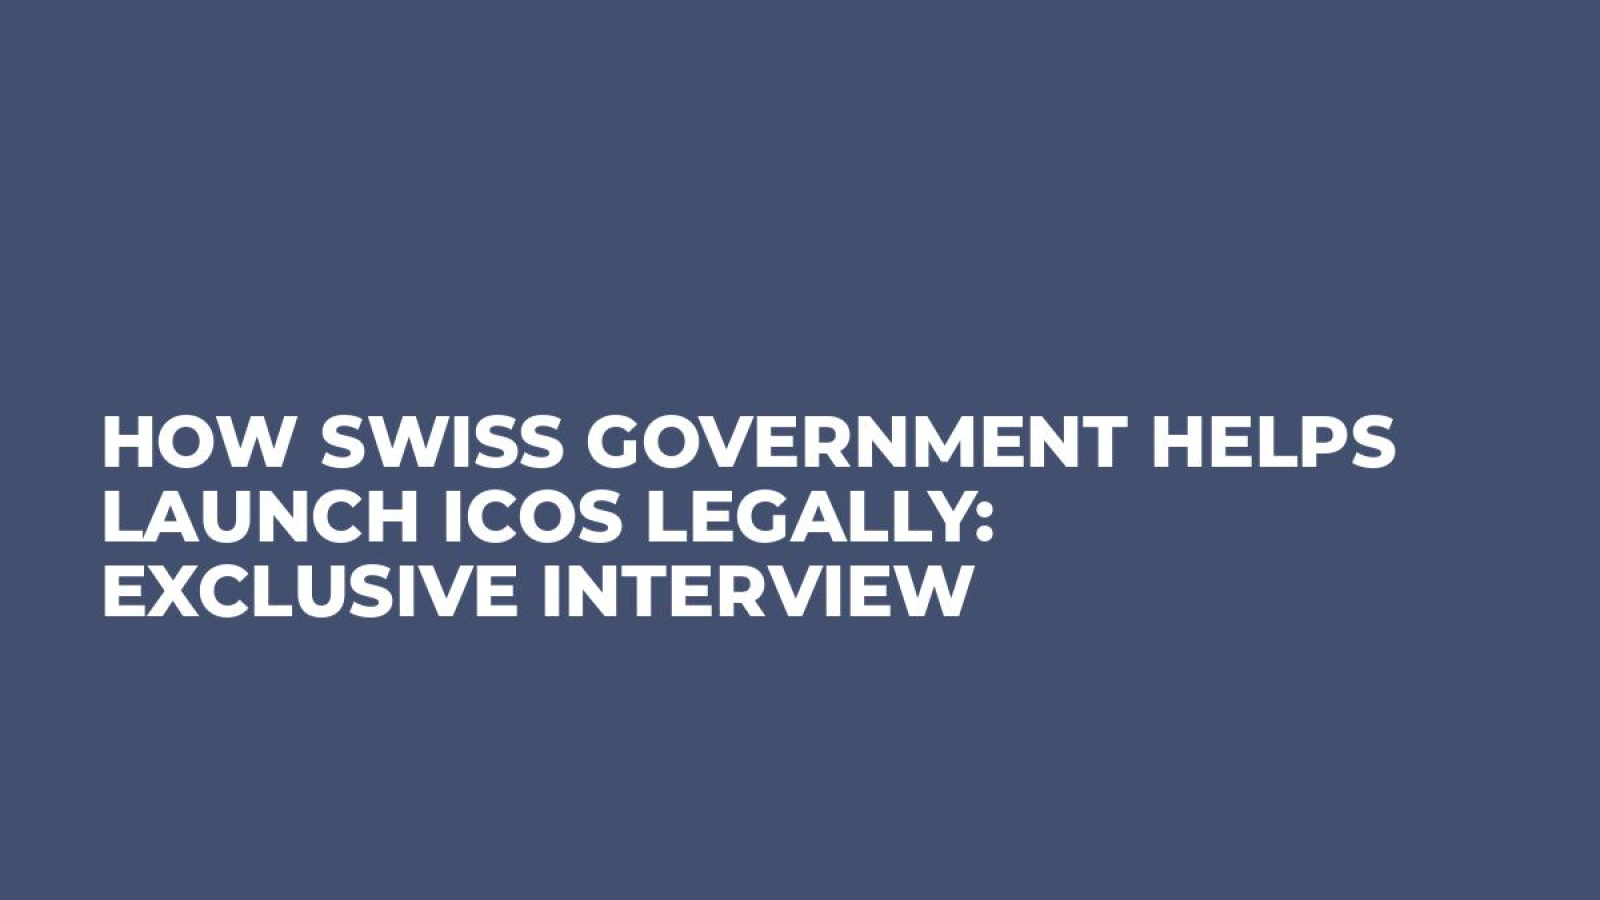 How Swiss Government Helps Launch ICOs Legally: Exclusive Interview